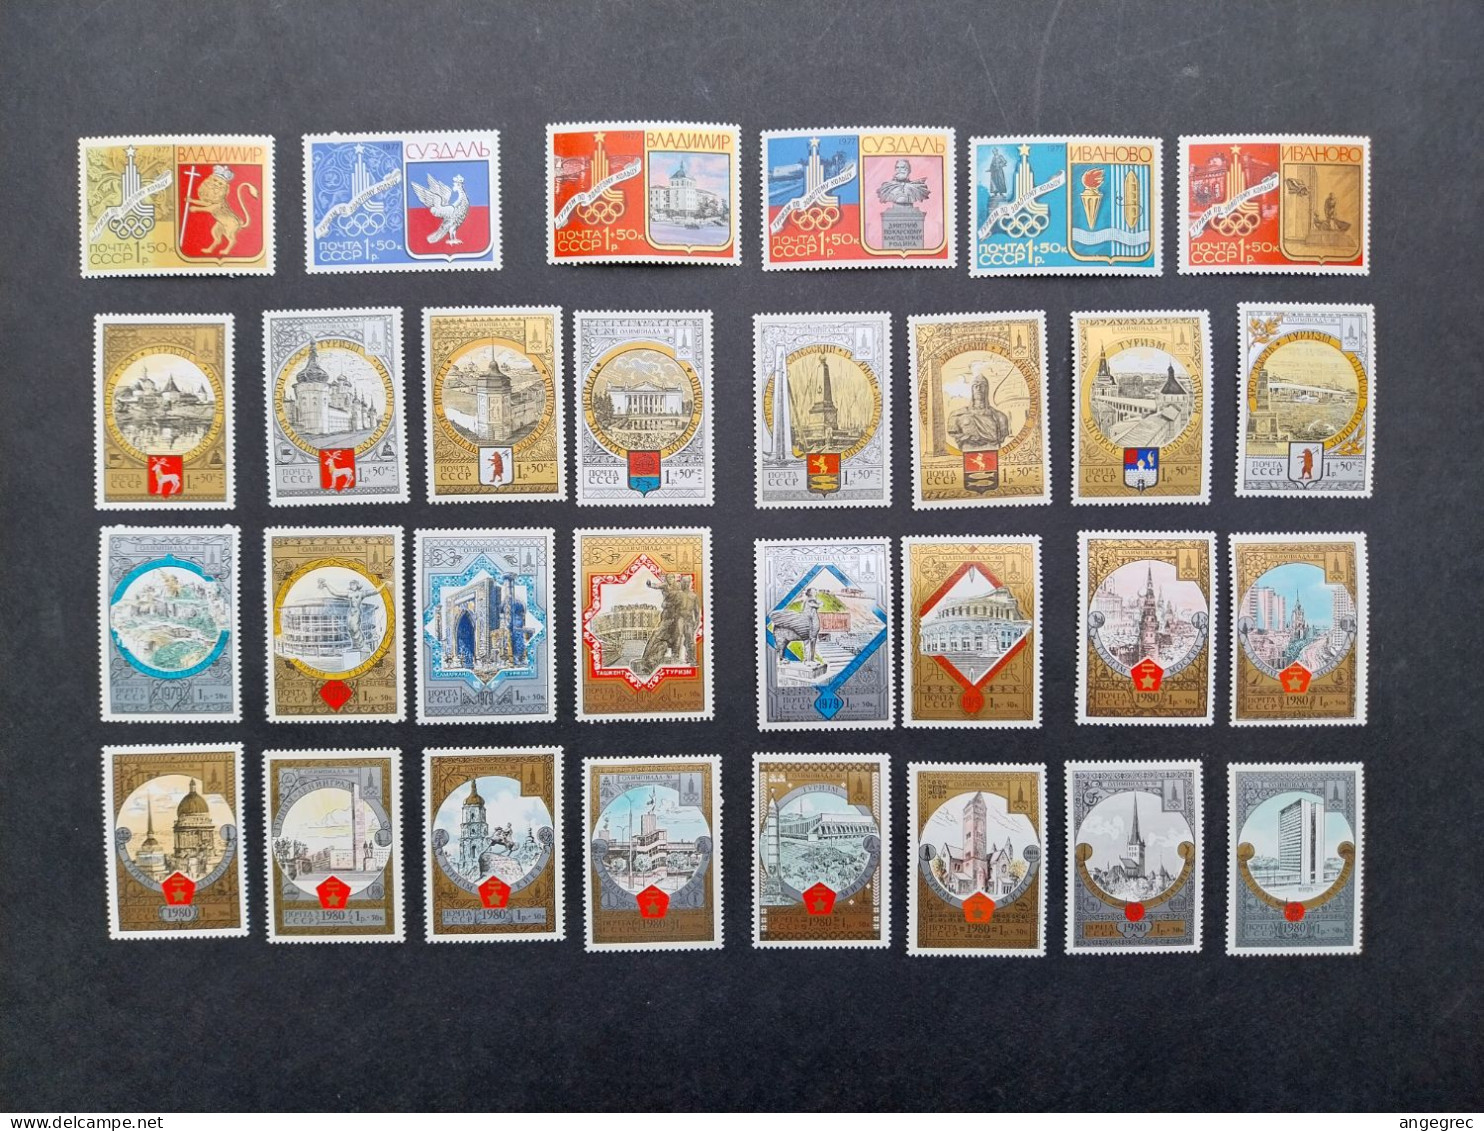 Russie Timbre Lot De 30 Ceinture D'or - Golden Rings Complet Set 30 Stamps Olympiade 80 Jeux Olympiques Neuf ** - Nuovi